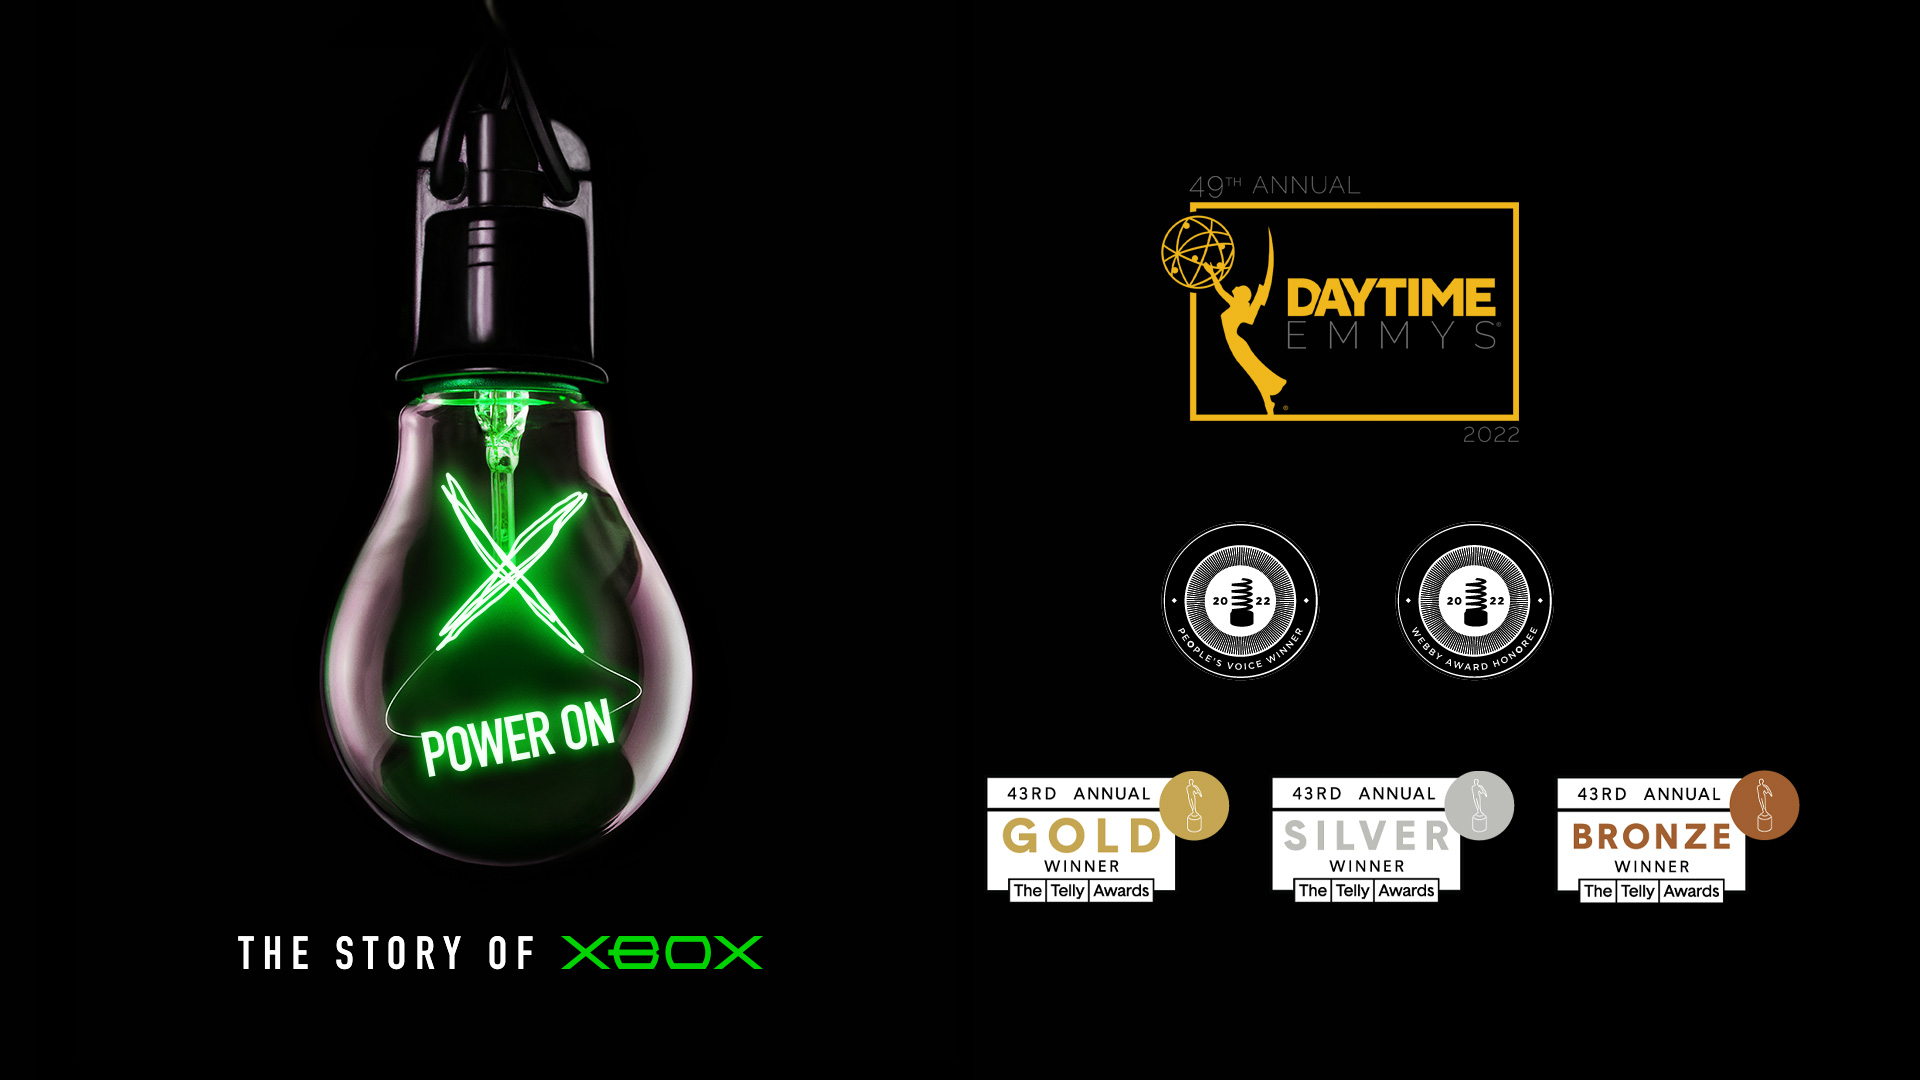 “Power On: The Story of Xbox” Wins a Daytime Emmy Award